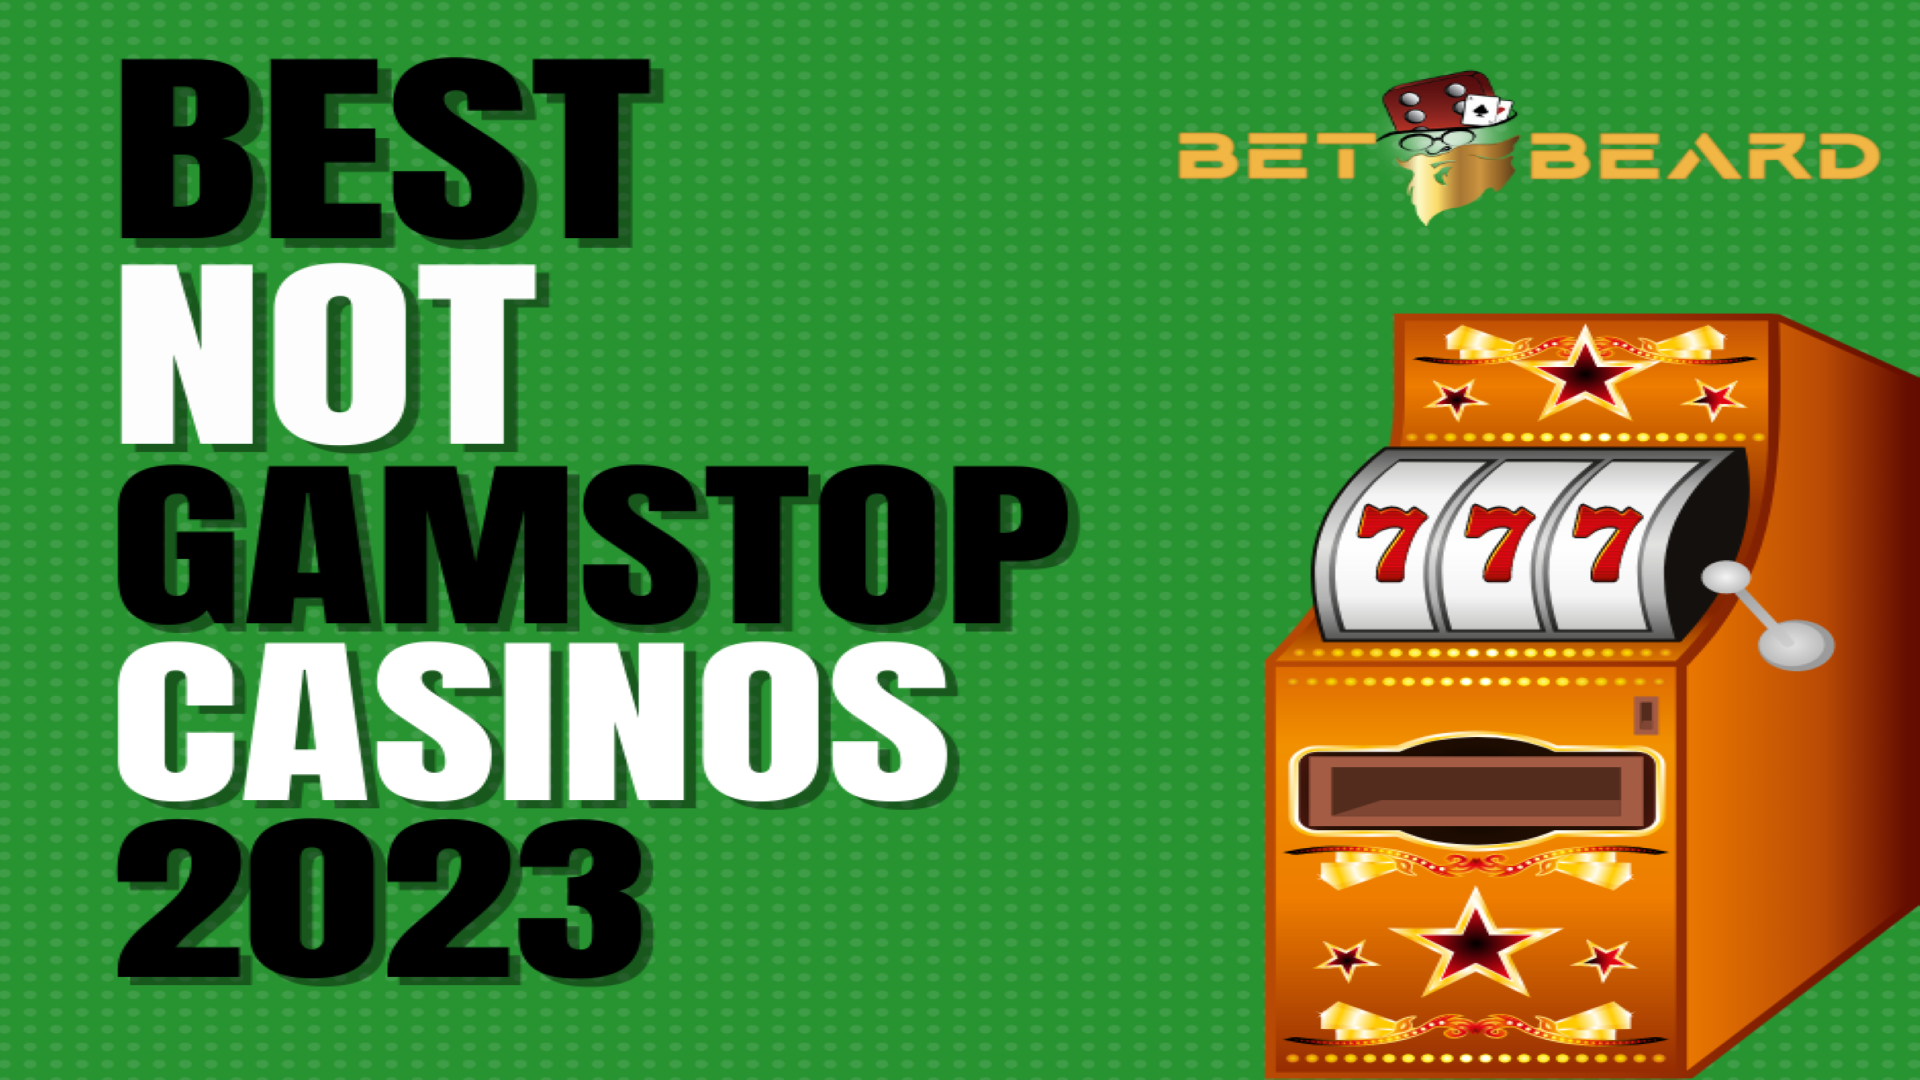 Add These 10 Mangets To Your non stop casinos